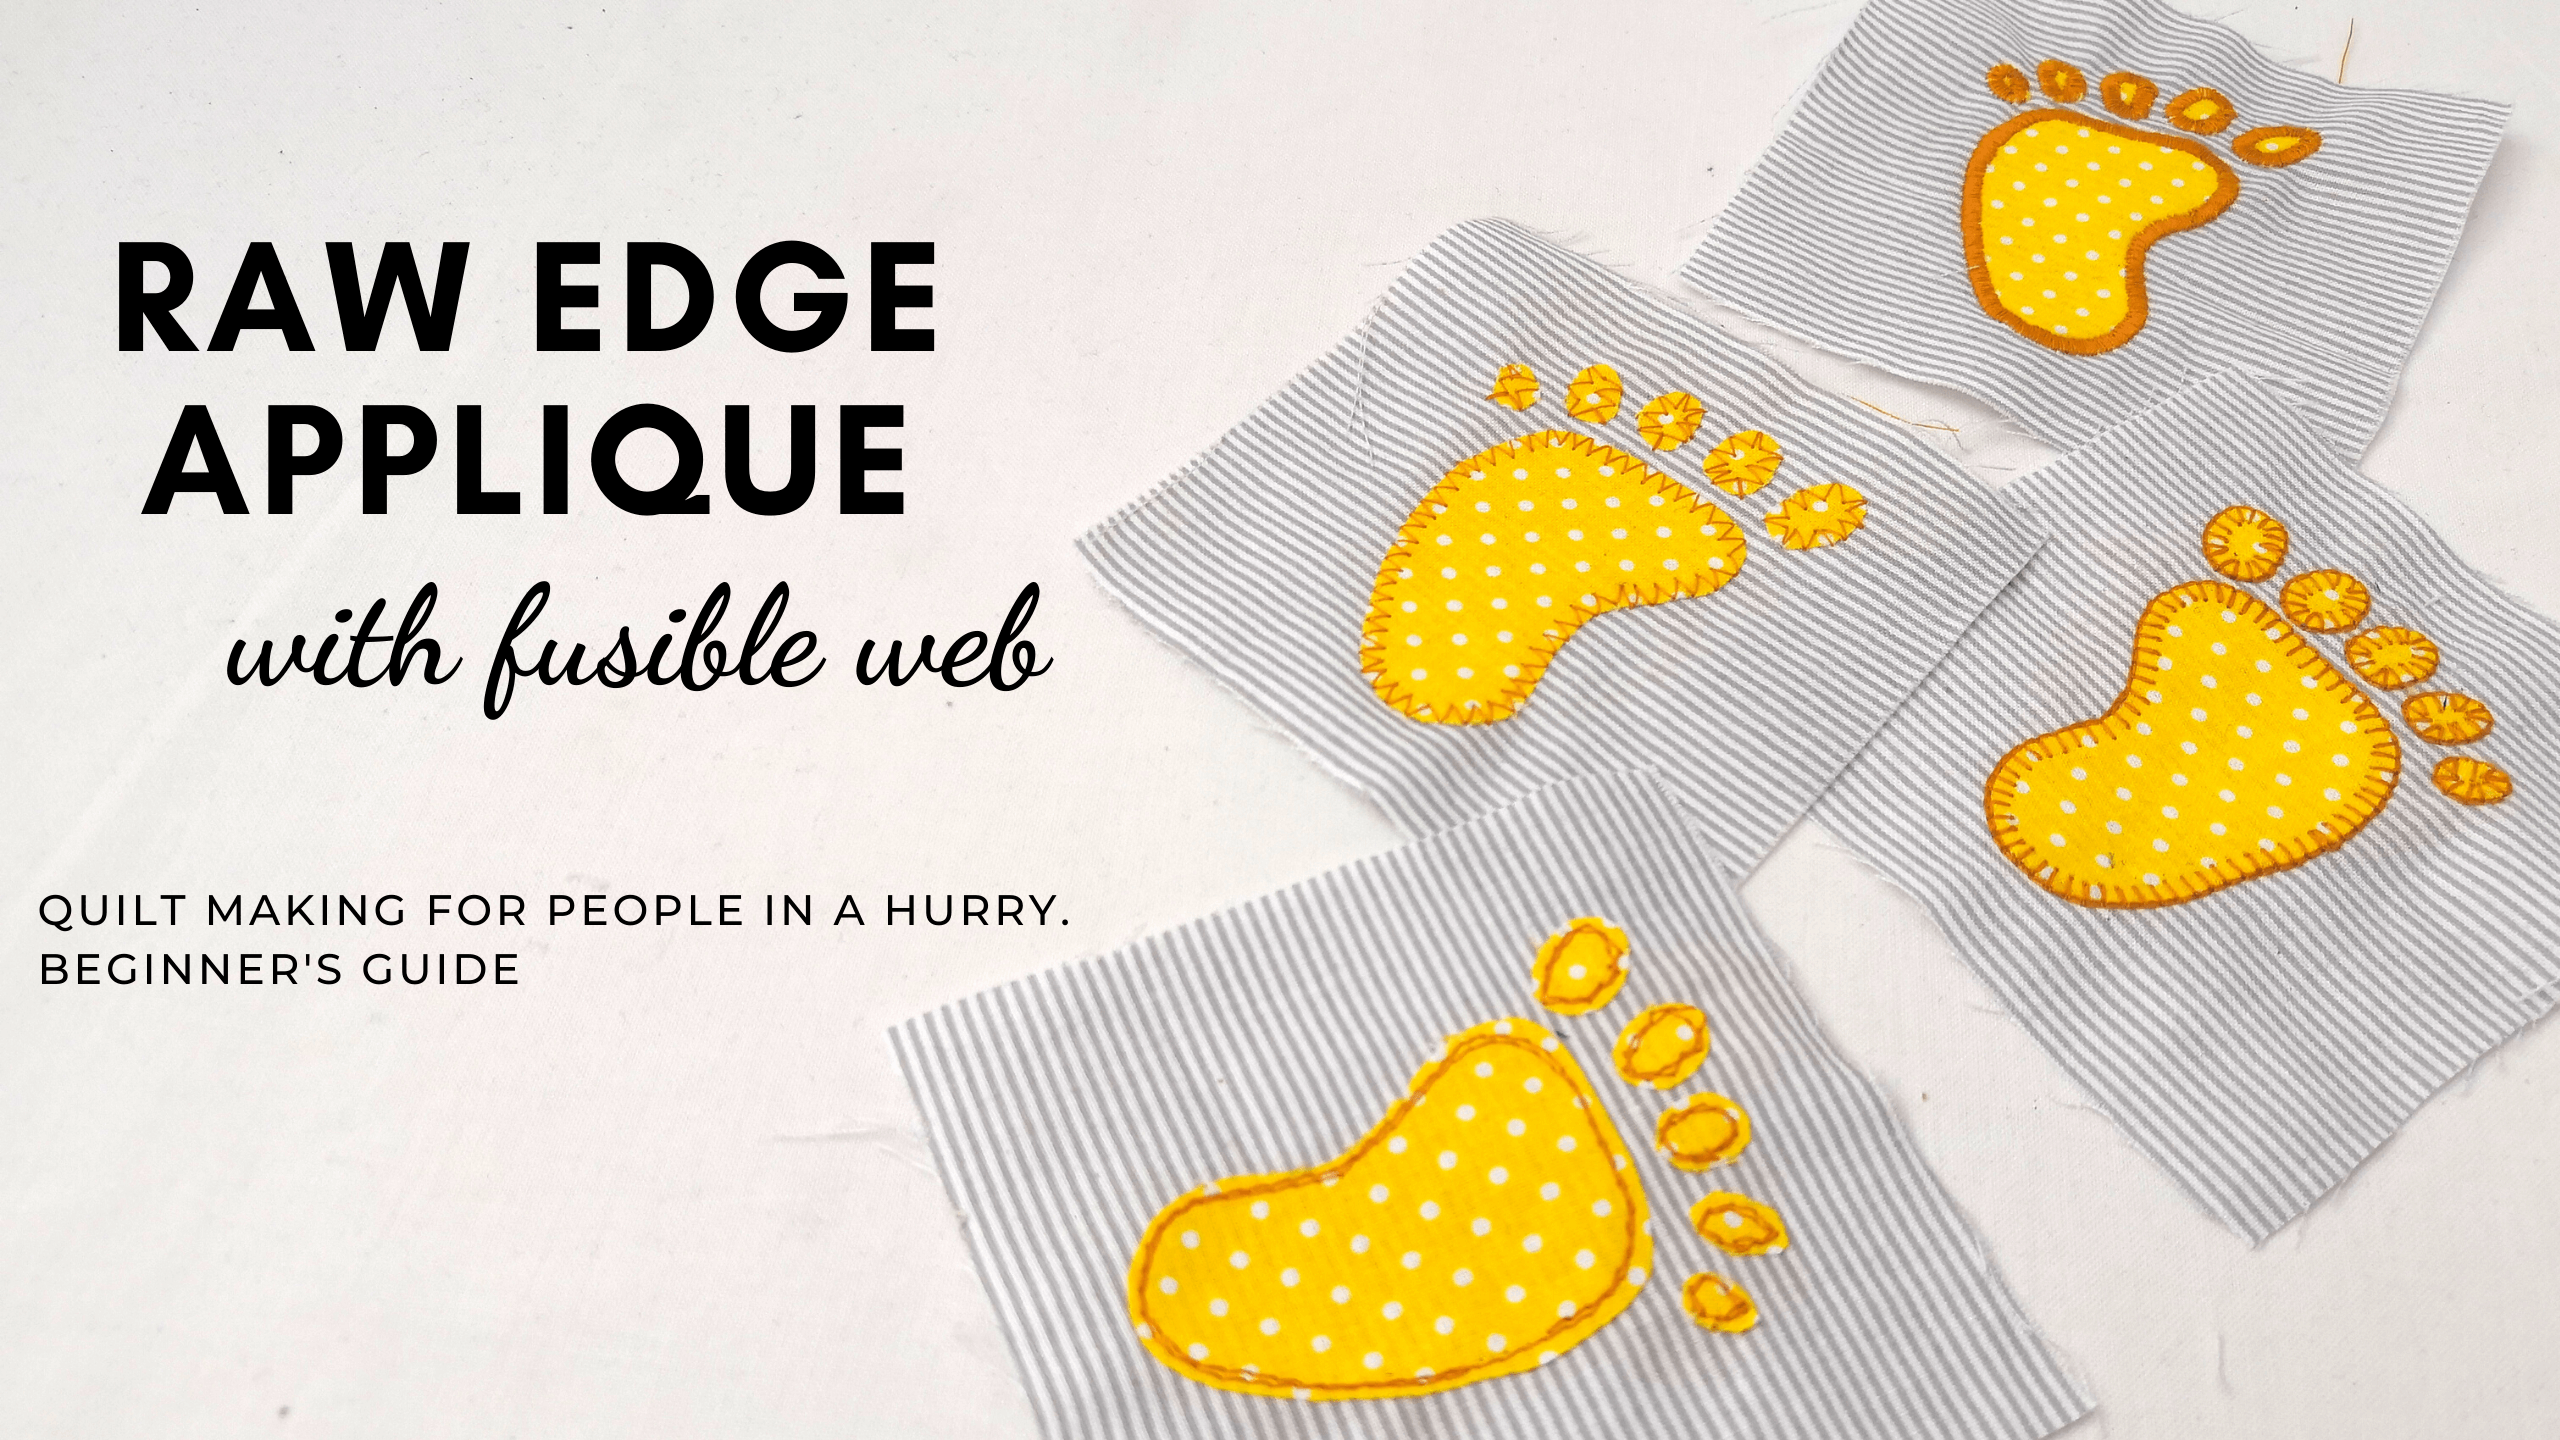 What is Raw Edge Applique?